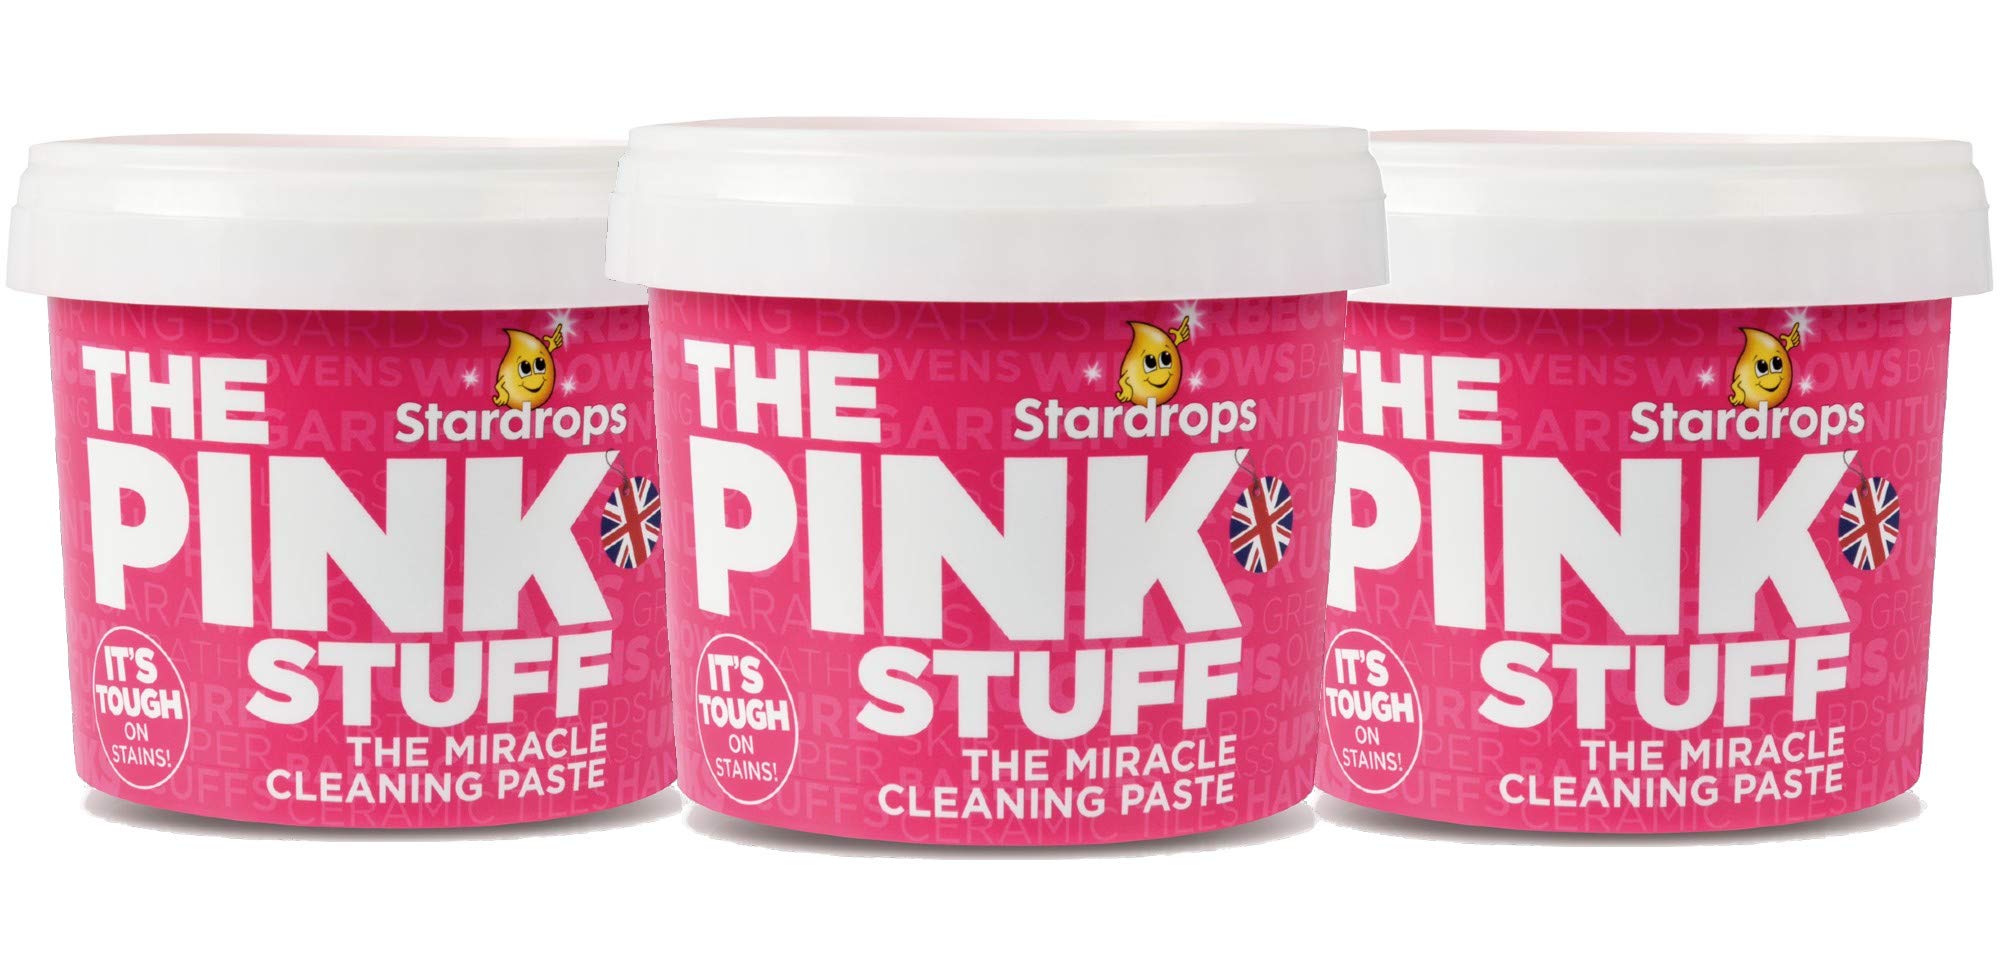 Stardrops - The Pink Stuff - The Miracle Cleaning Paste 3-Pack Bundle (3 Cleaning Paste) $11.99 @ Amazon